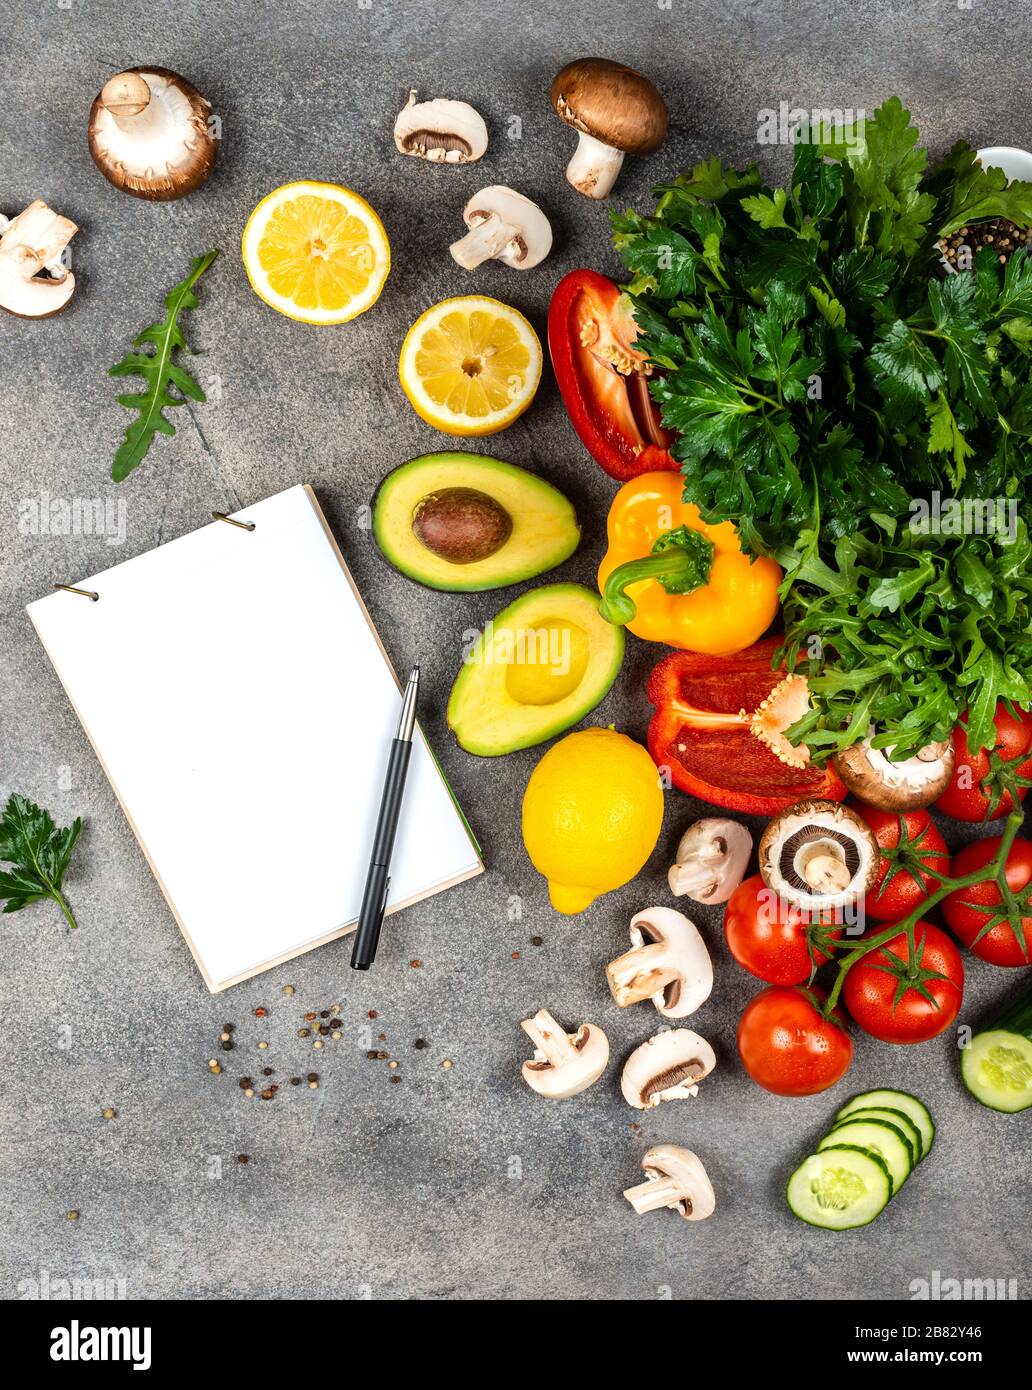 Different vegetables and ingredients for cooking vegeterian dishes. A book for writing recipes lies on a table. Copy space for text Stock Photo